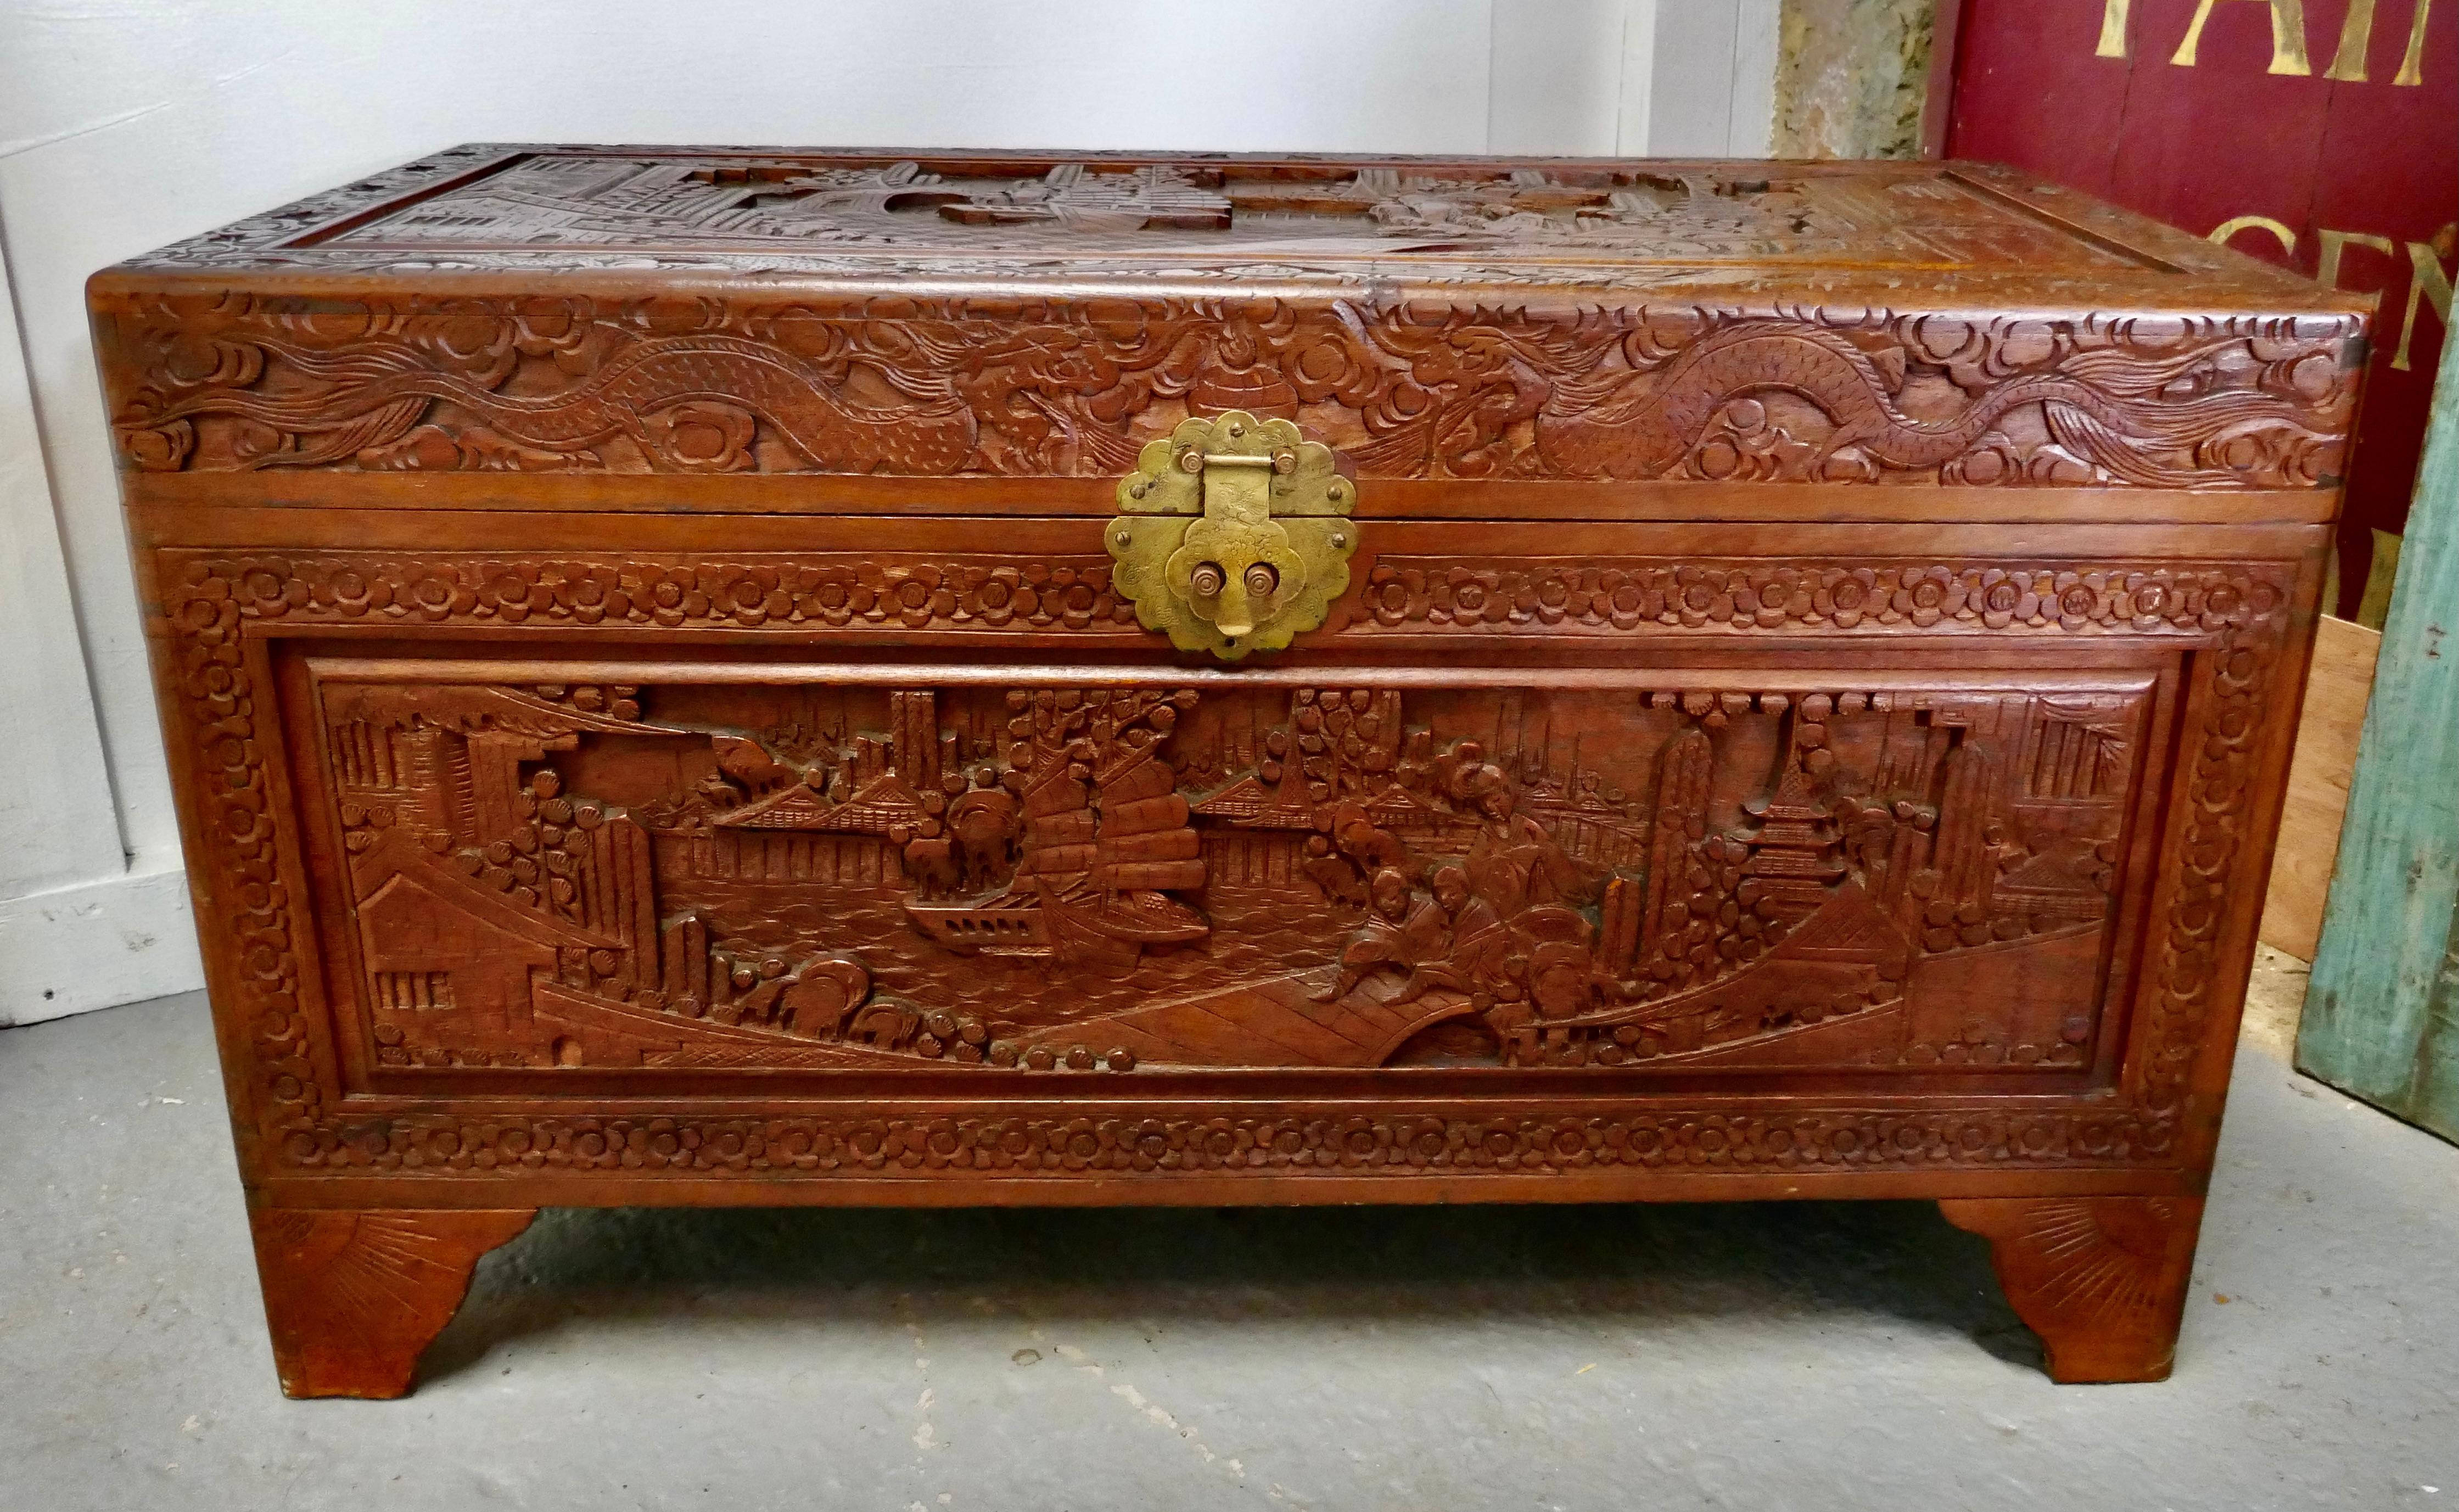 A carved oriental Camphor wood chest

This is a beautiful carved chest is made from Camphor wood, for those of you who do not know camphor wood it looks a lot like mahogany it is a hard wood which lends itself very well to carving.
However the